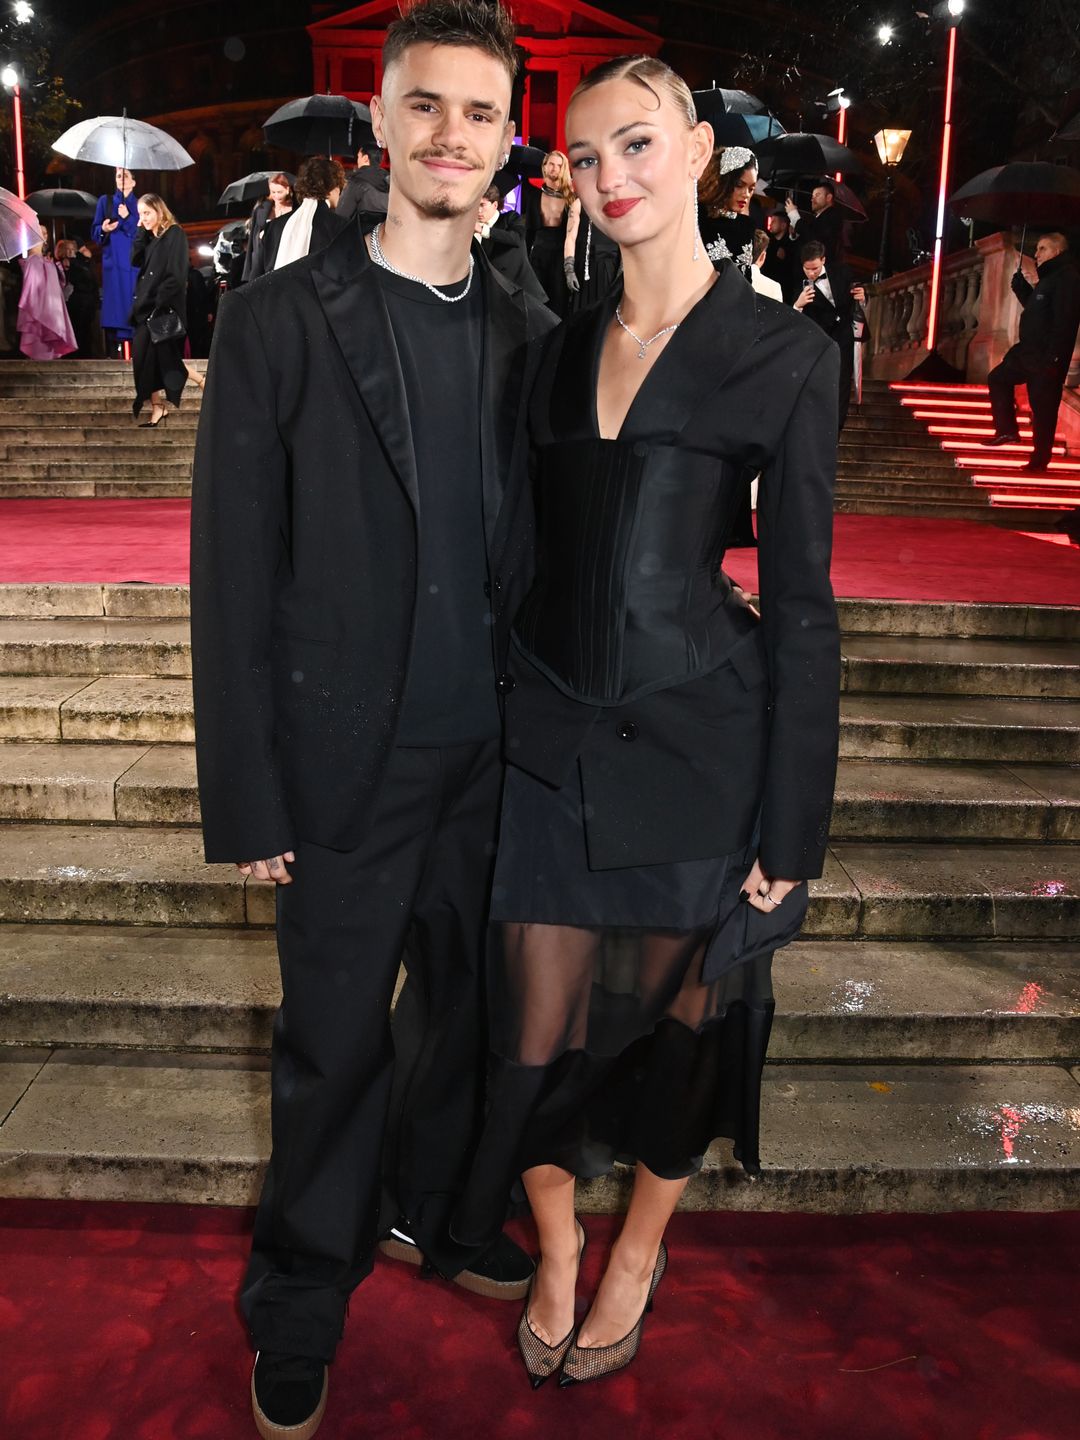 Mia Regan and Romeo Beckham rocking all-black outfits at the event 